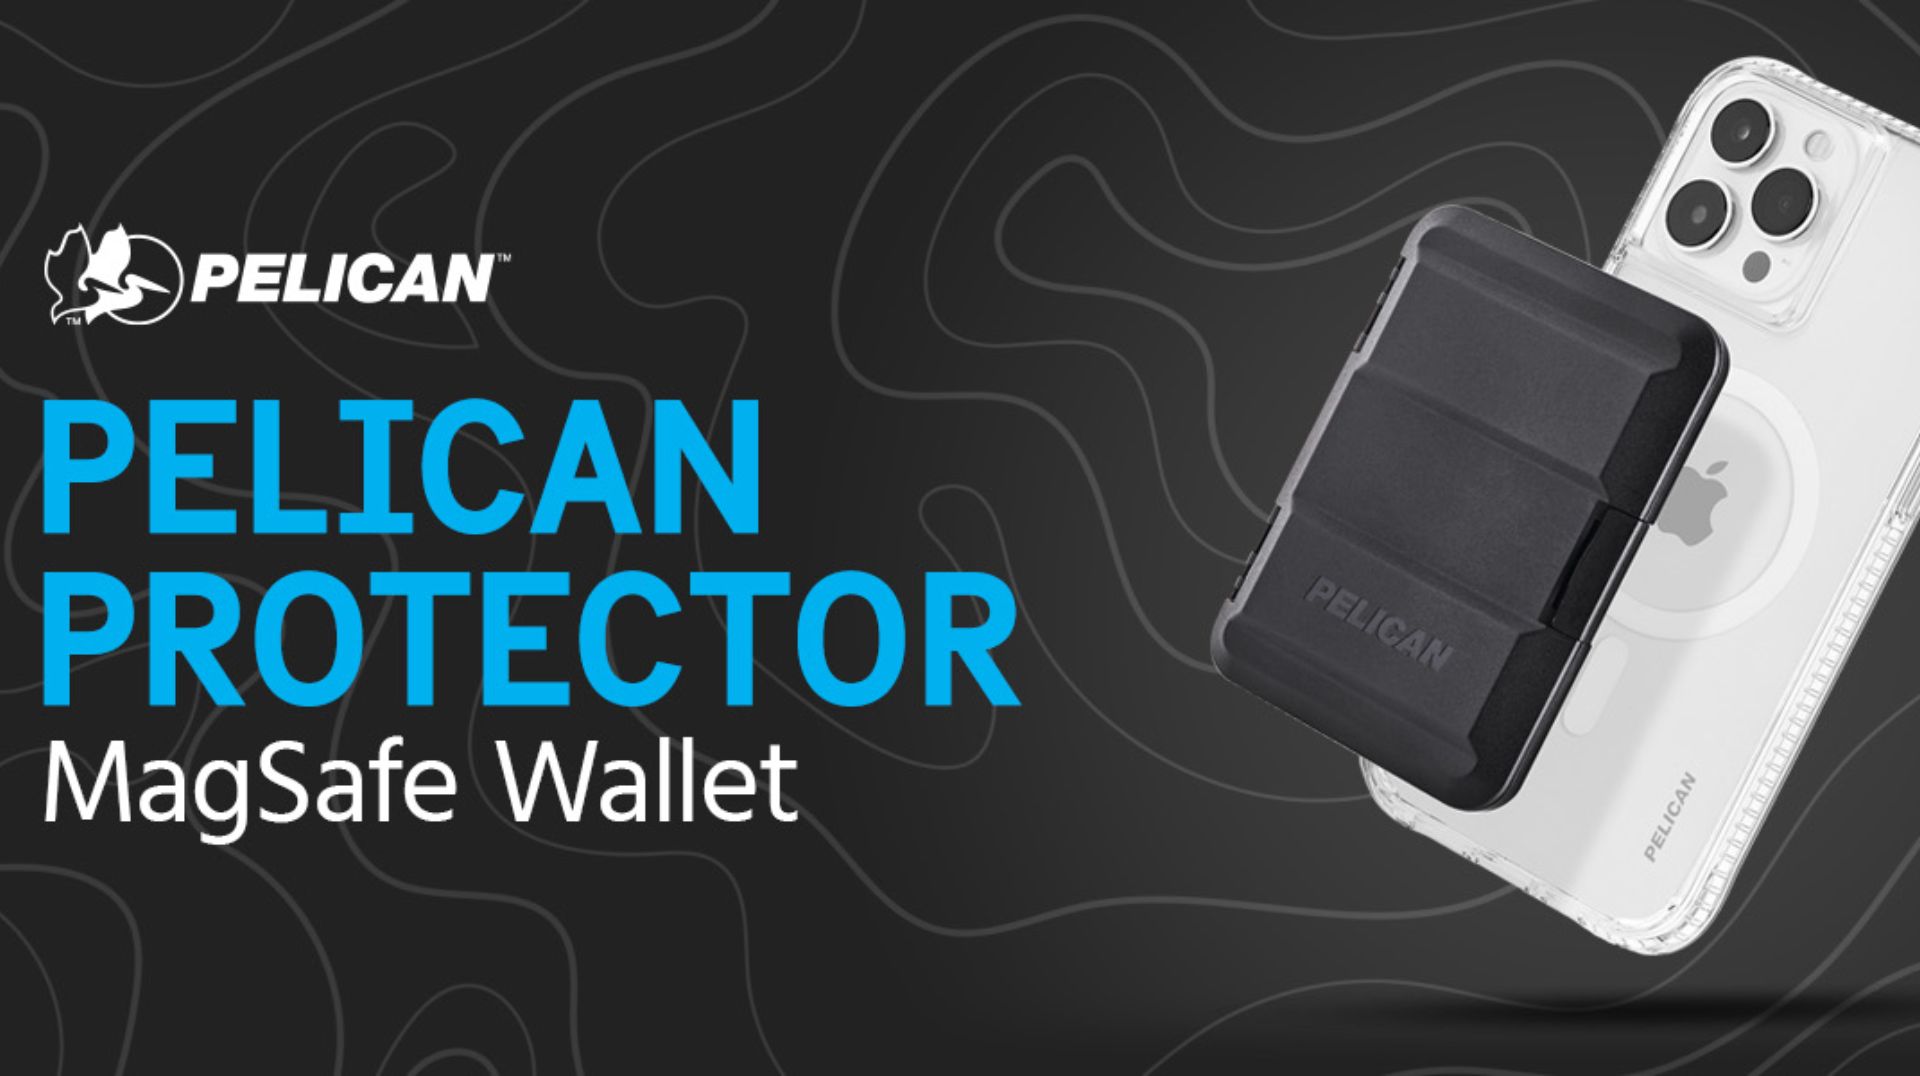 Pelican Protector Magnetic Wallet MagSafe Compatible